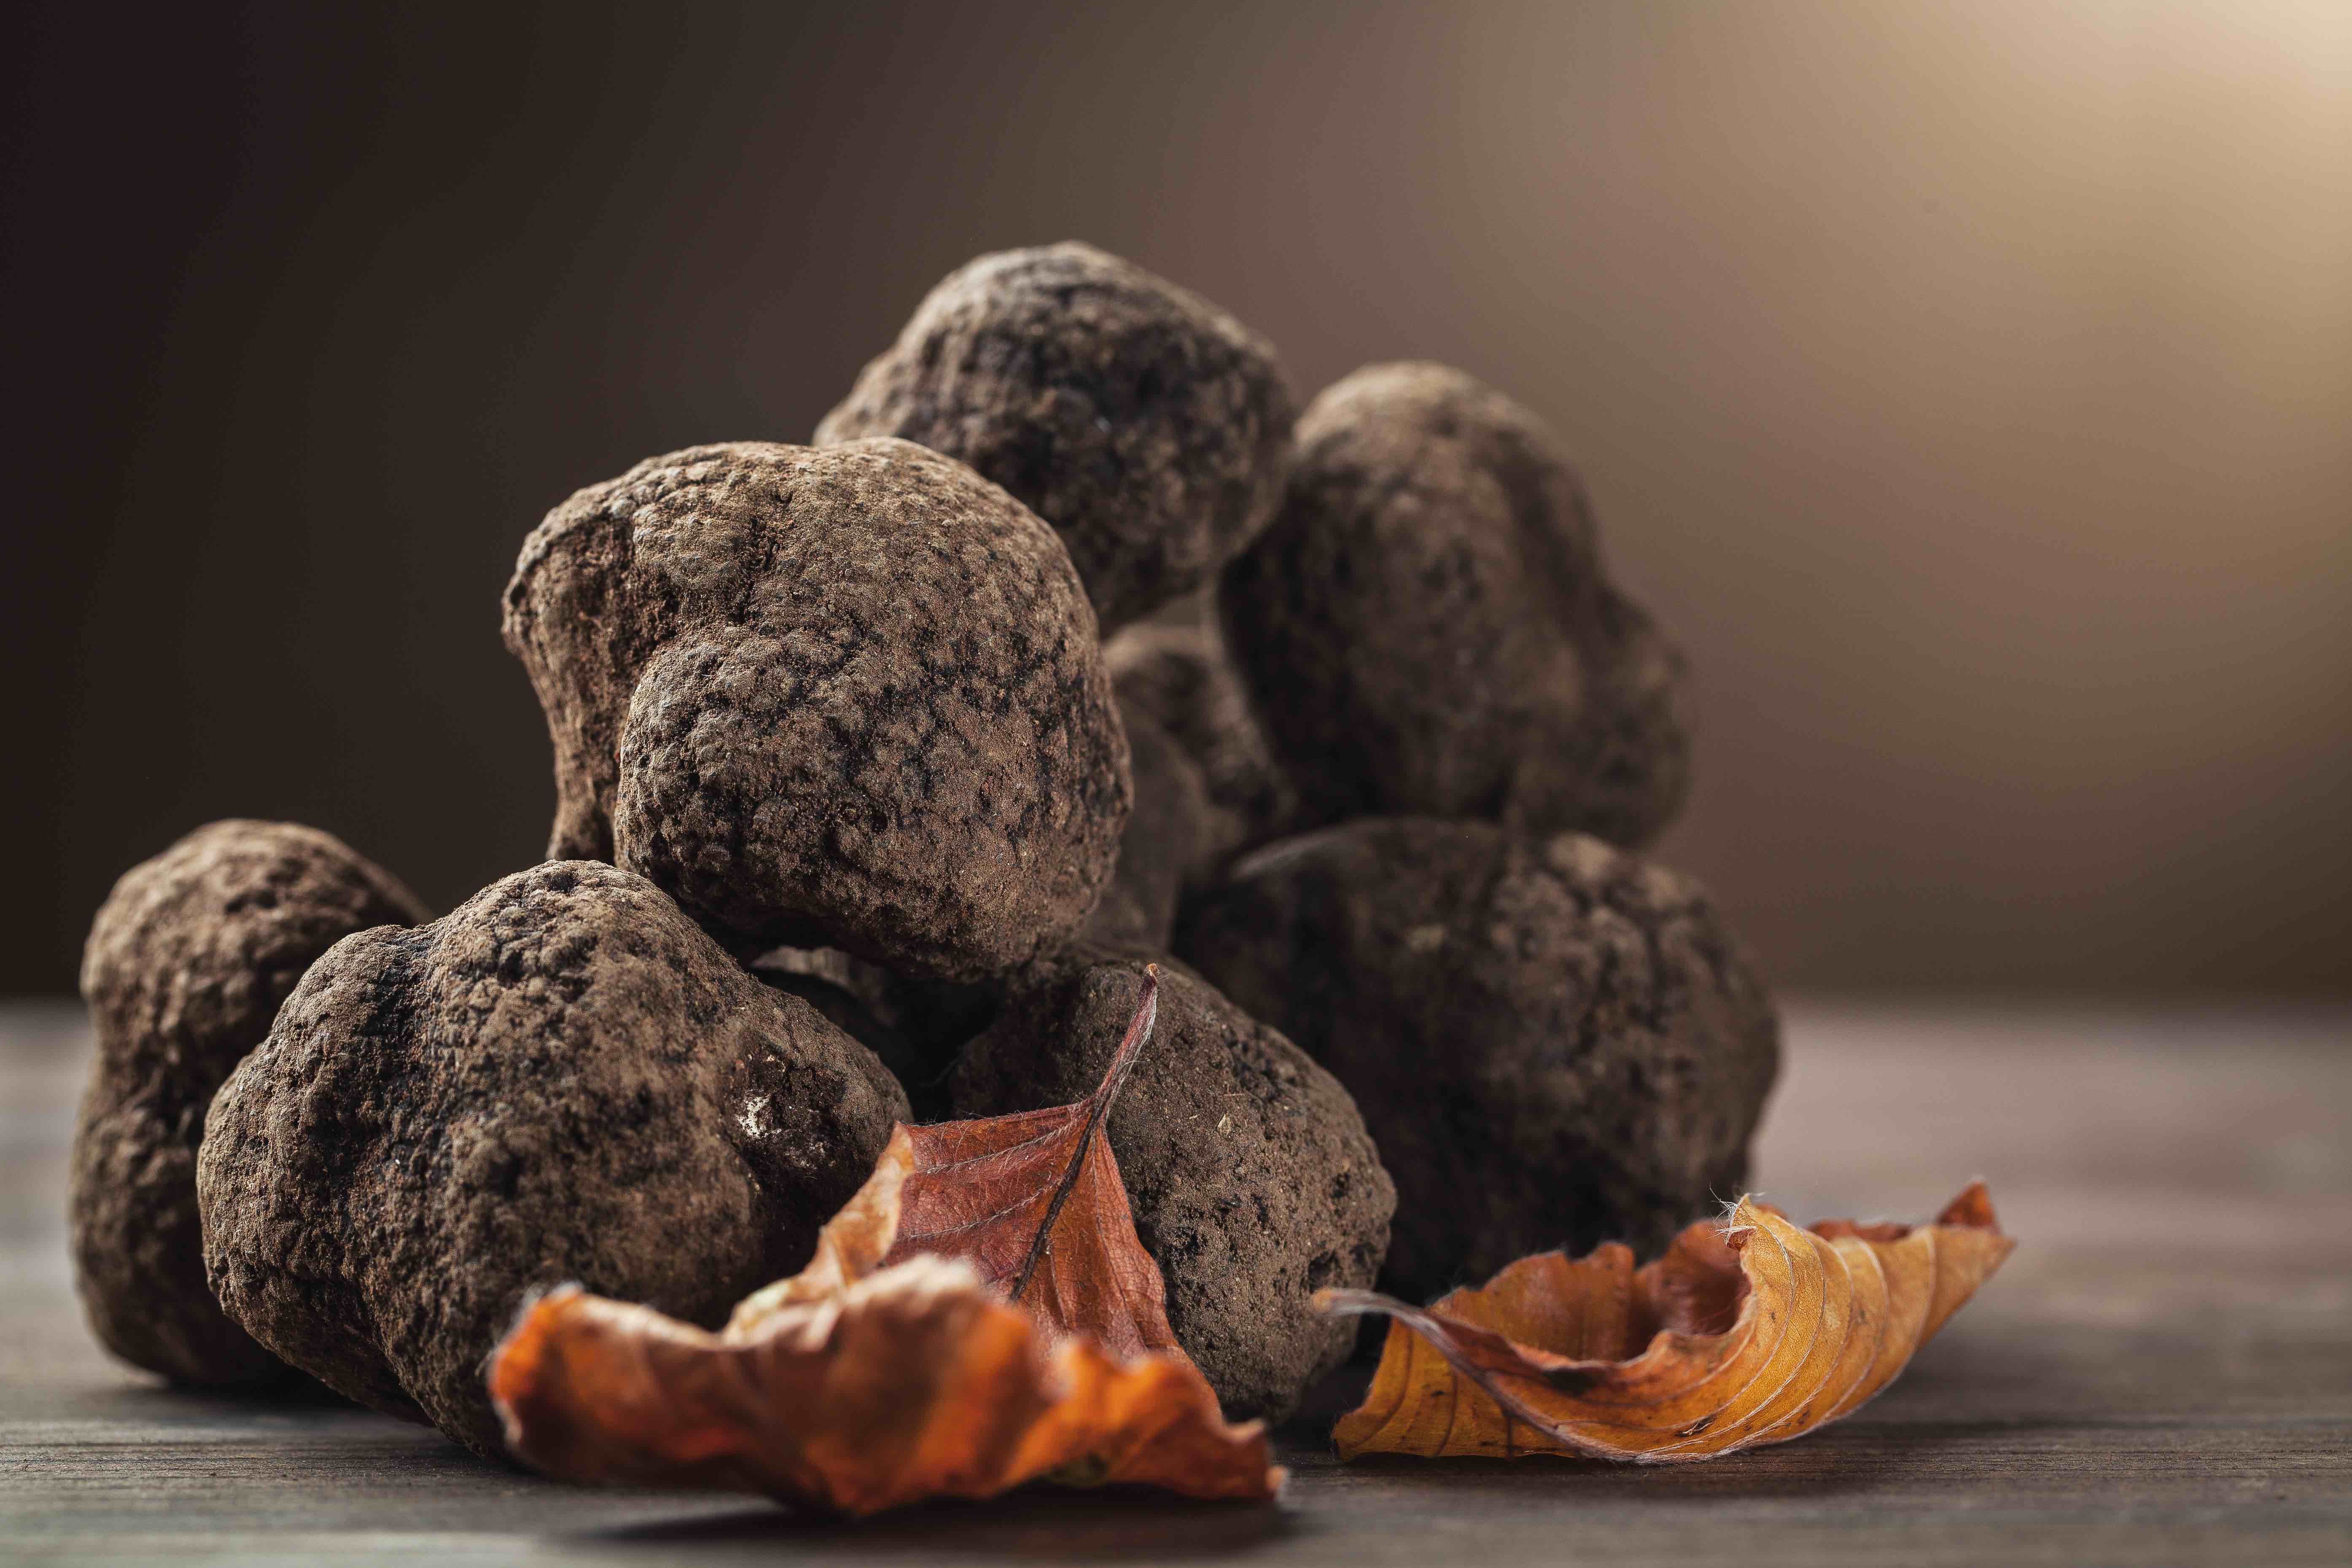 Where to go truffle hunting this fall